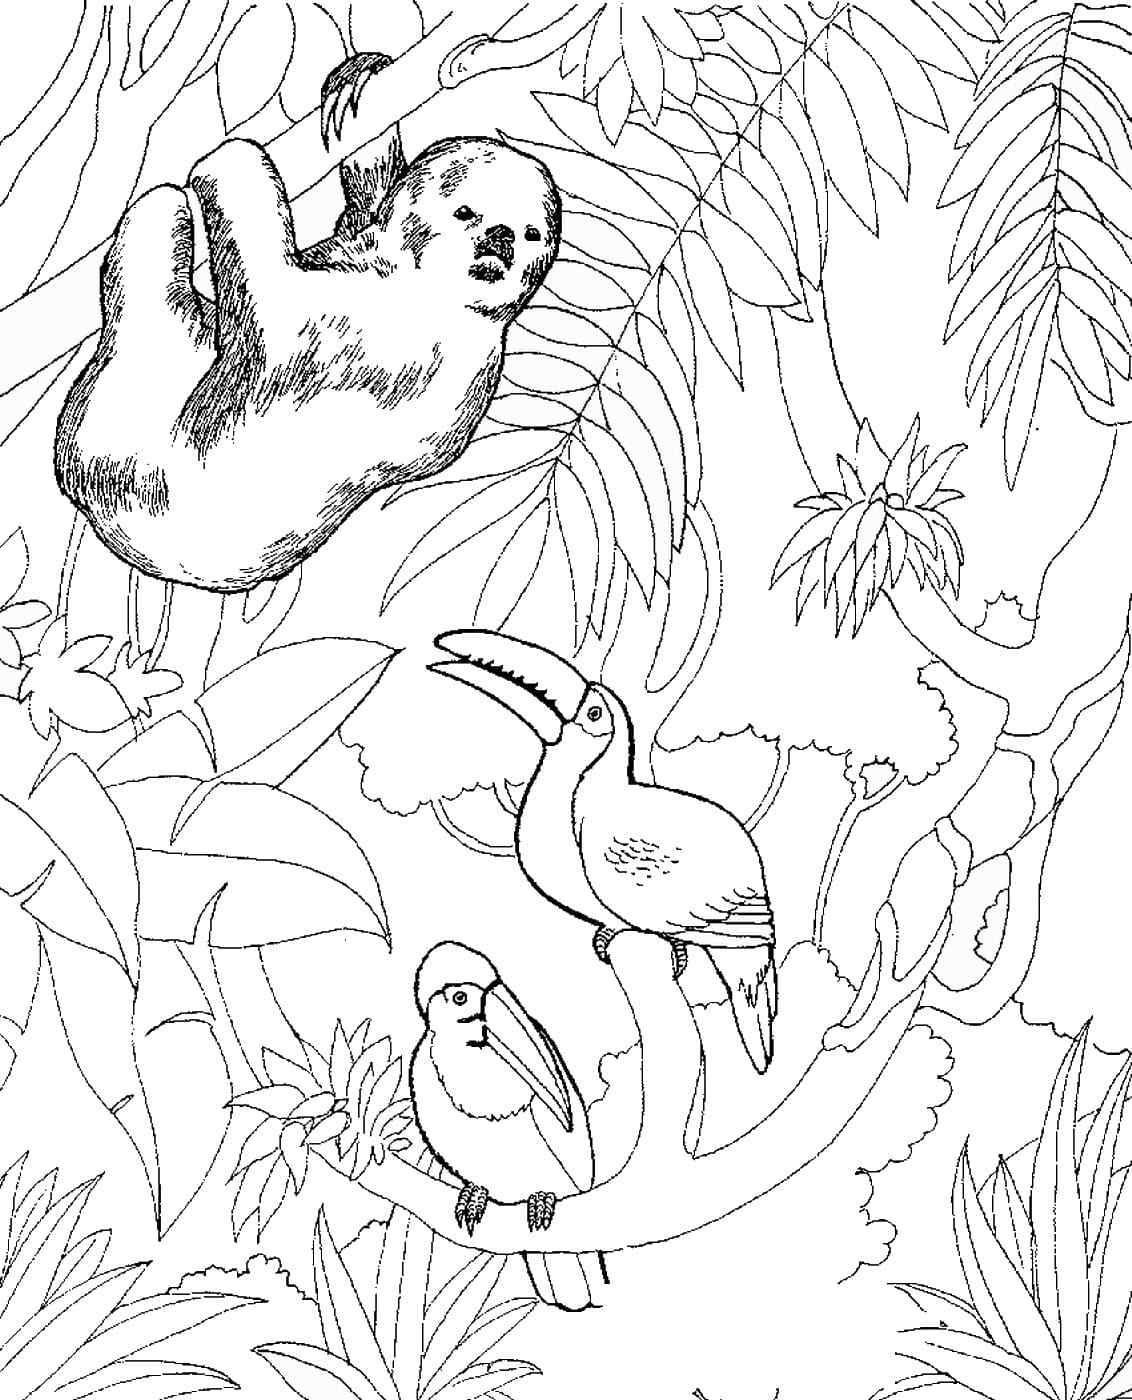 A Sloth Hangs Around The Parrots